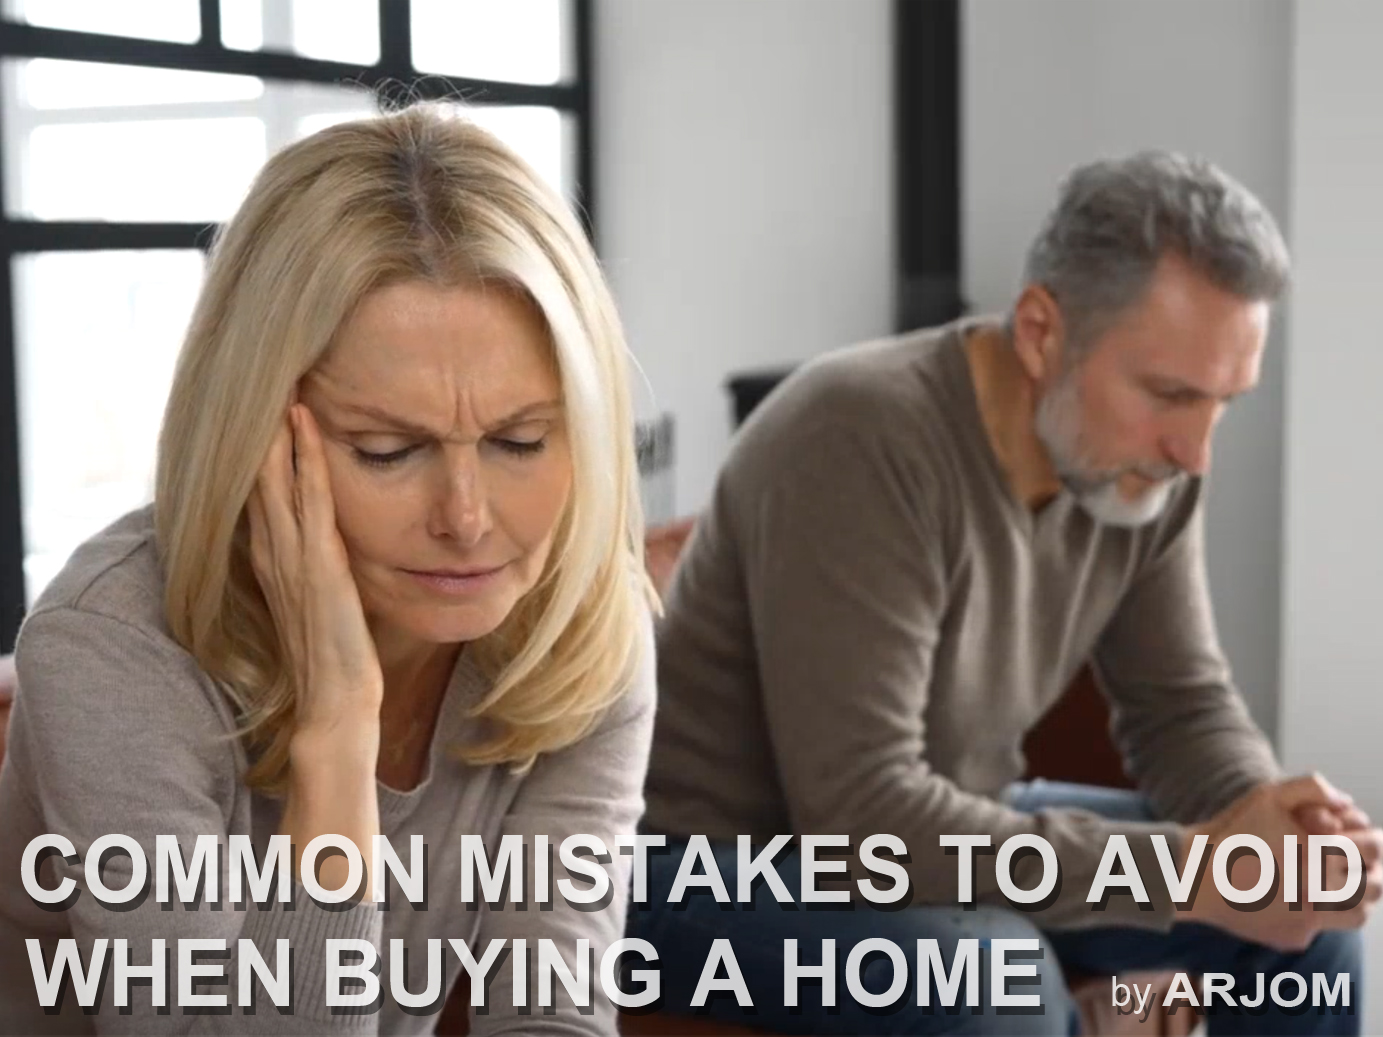 COMMON MISTAKES TO AVOID WHEN BUYING A HOME by ARJOM